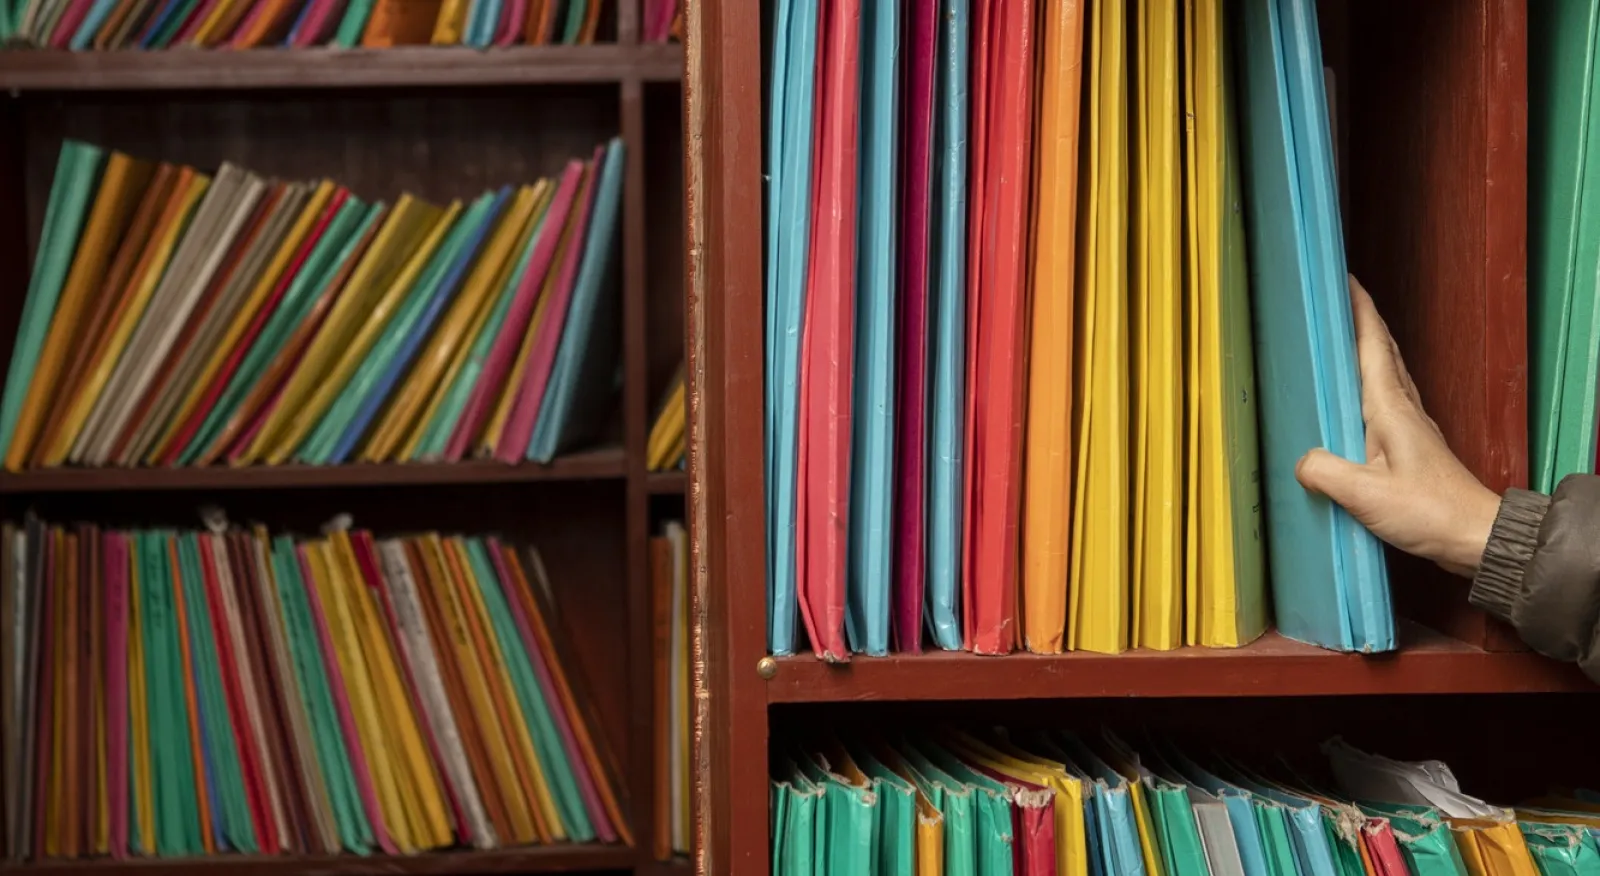 A bookshelf is filled with colourful files across a range of shelves